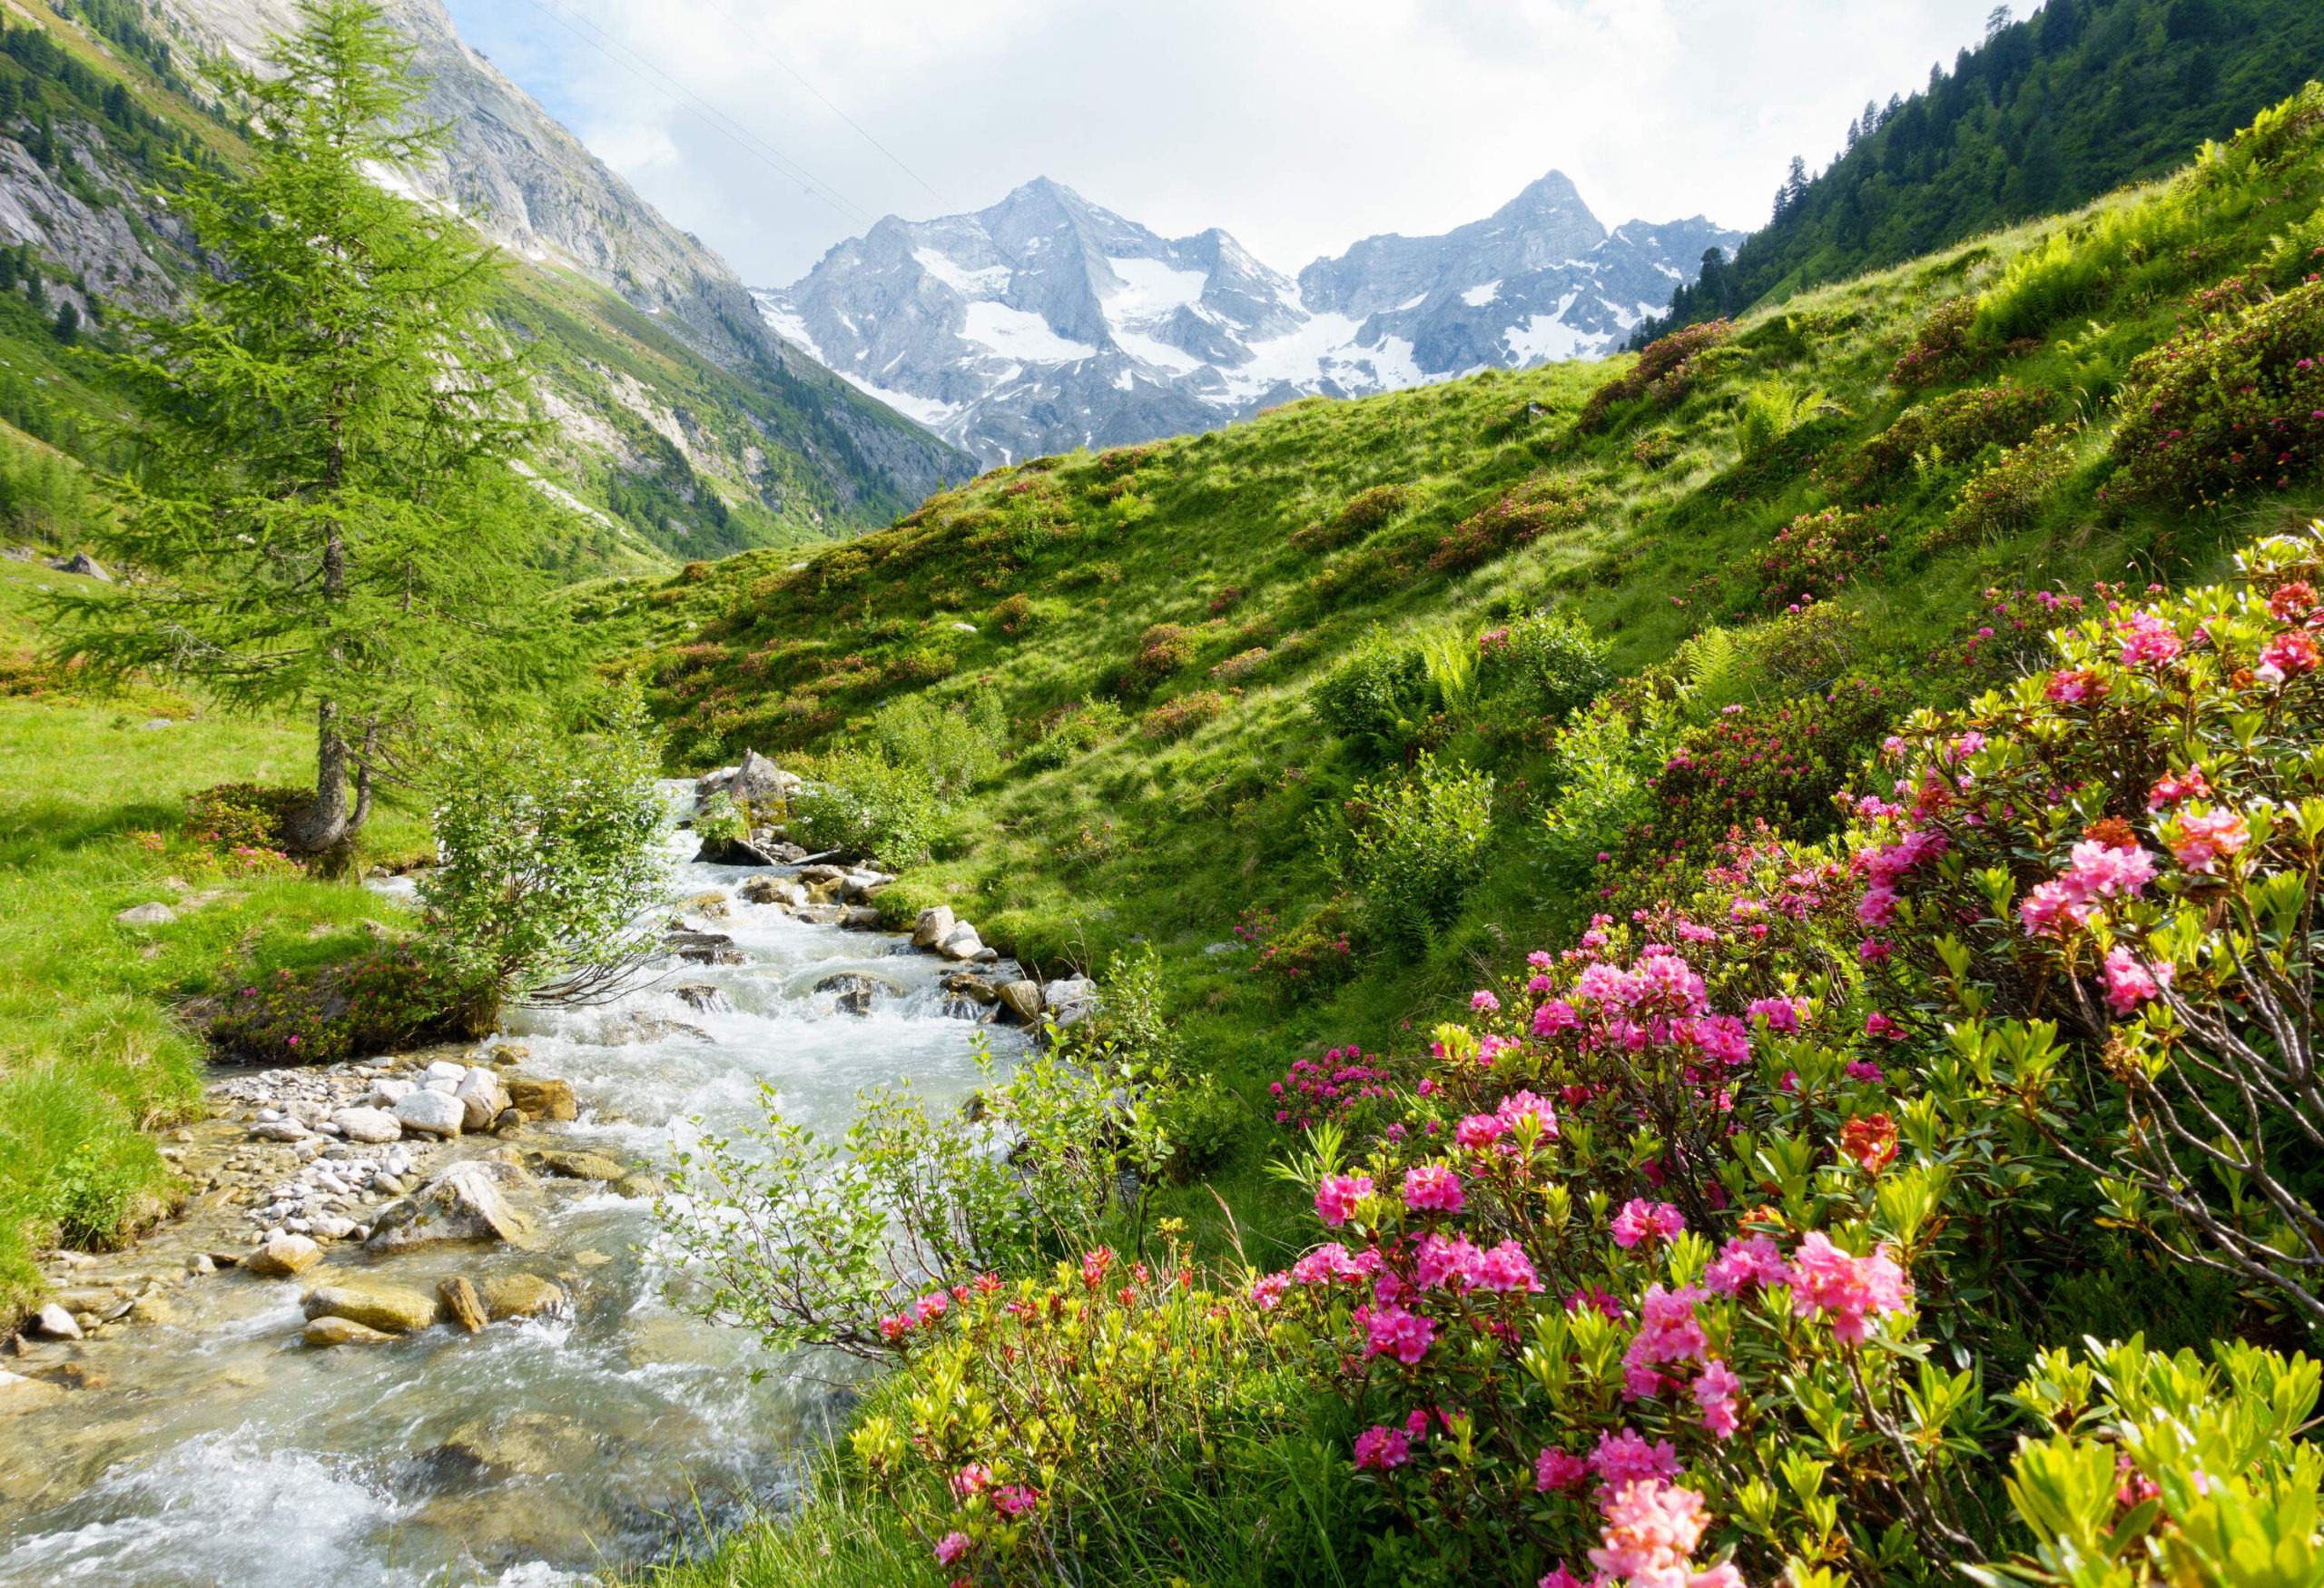 Water flows on a small stream across a valley of lush foliage and colourful flowers with distant views of snow-capped mountains.